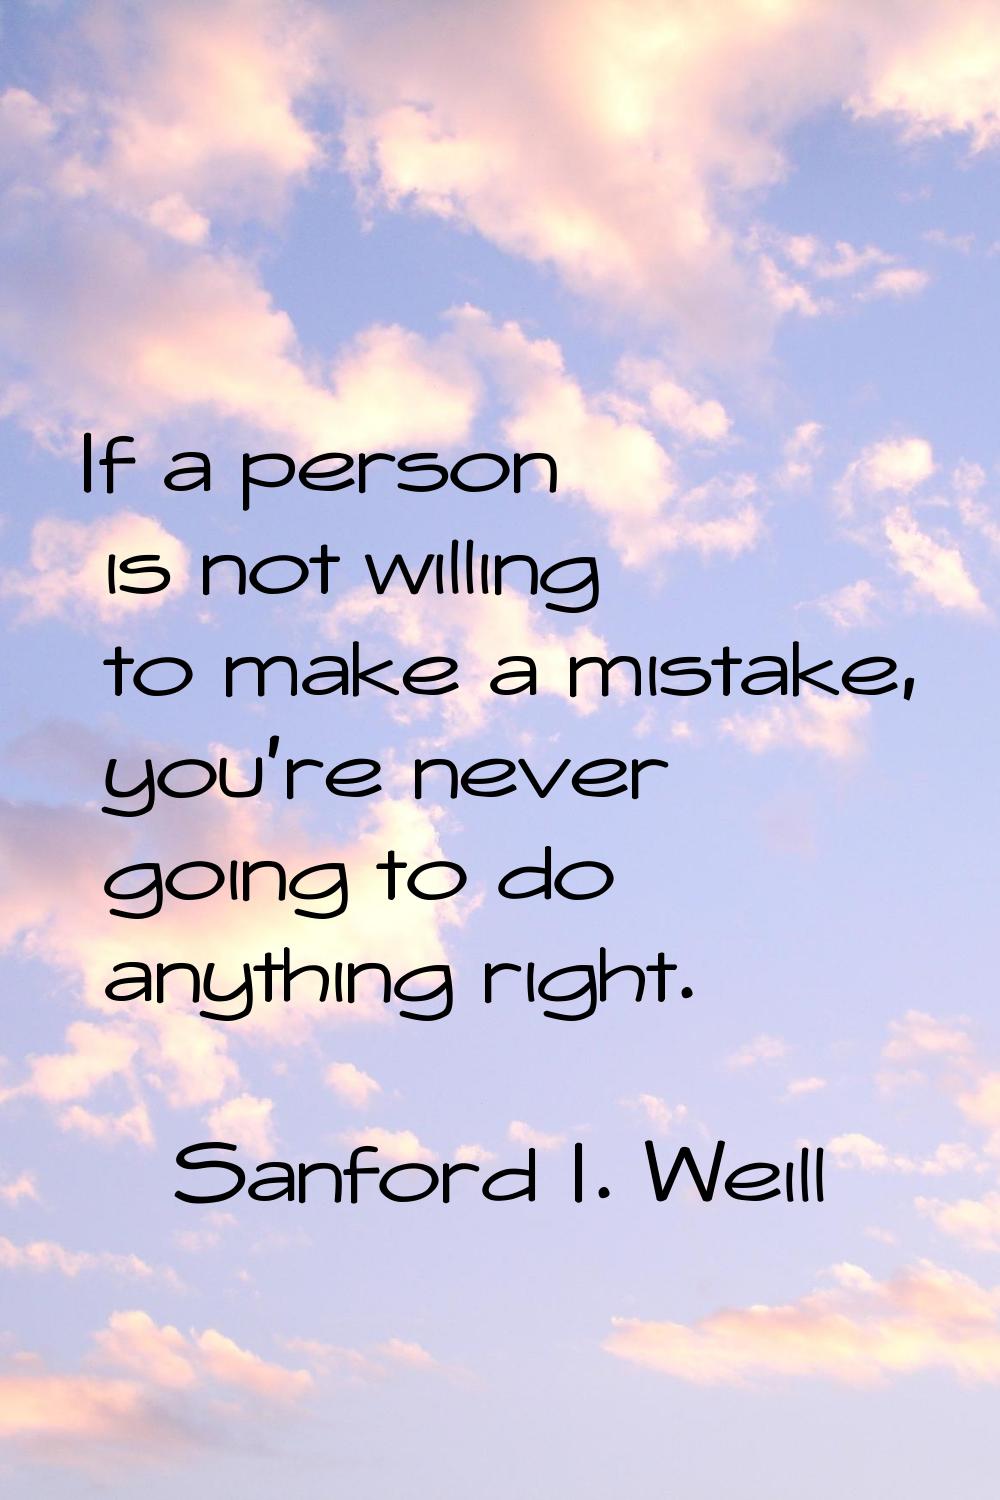 If a person is not willing to make a mistake, you're never going to do anything right.